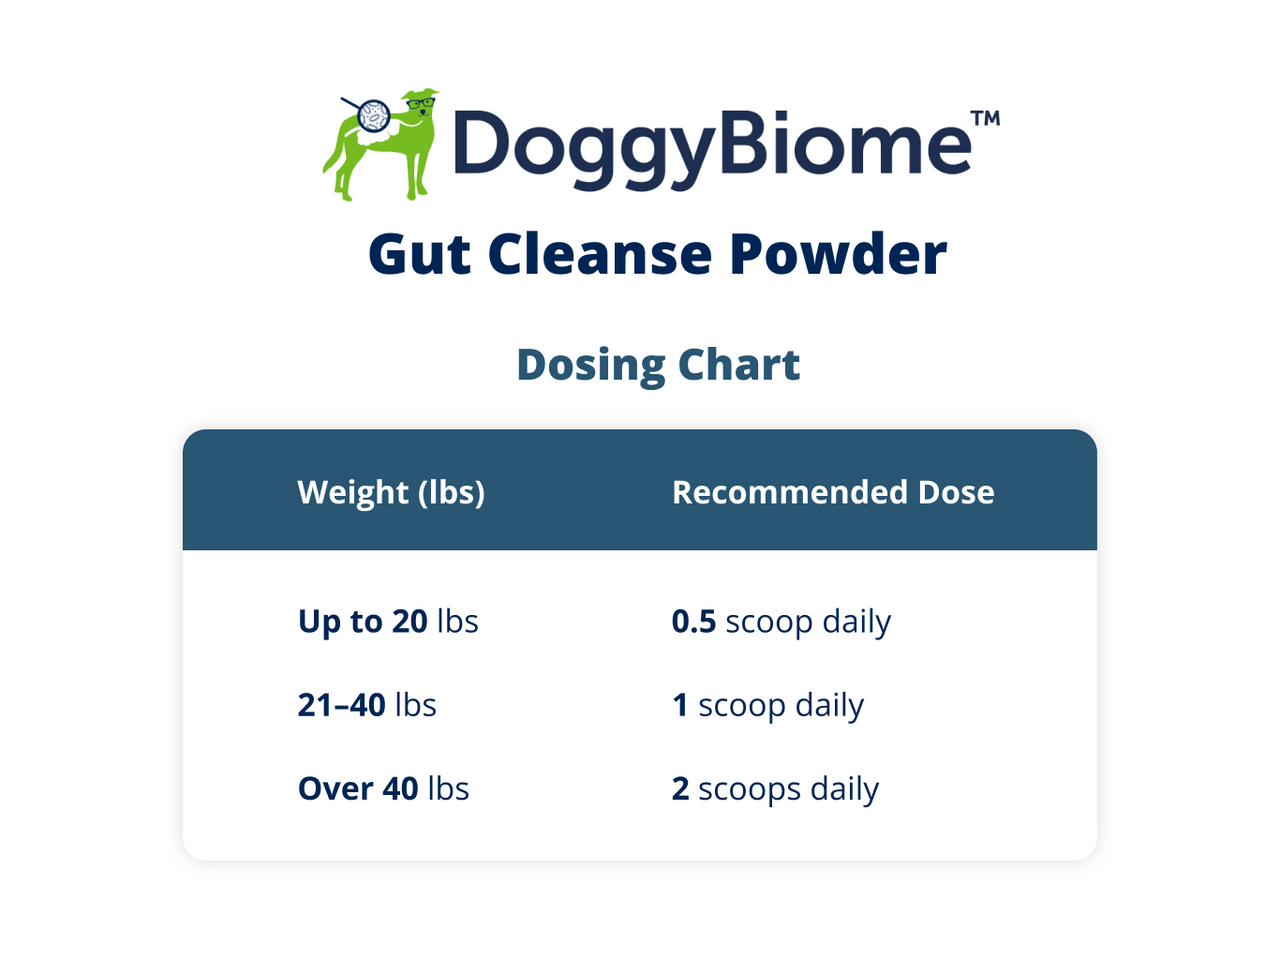 DoggyBiome™ Gut Cleanse Powder